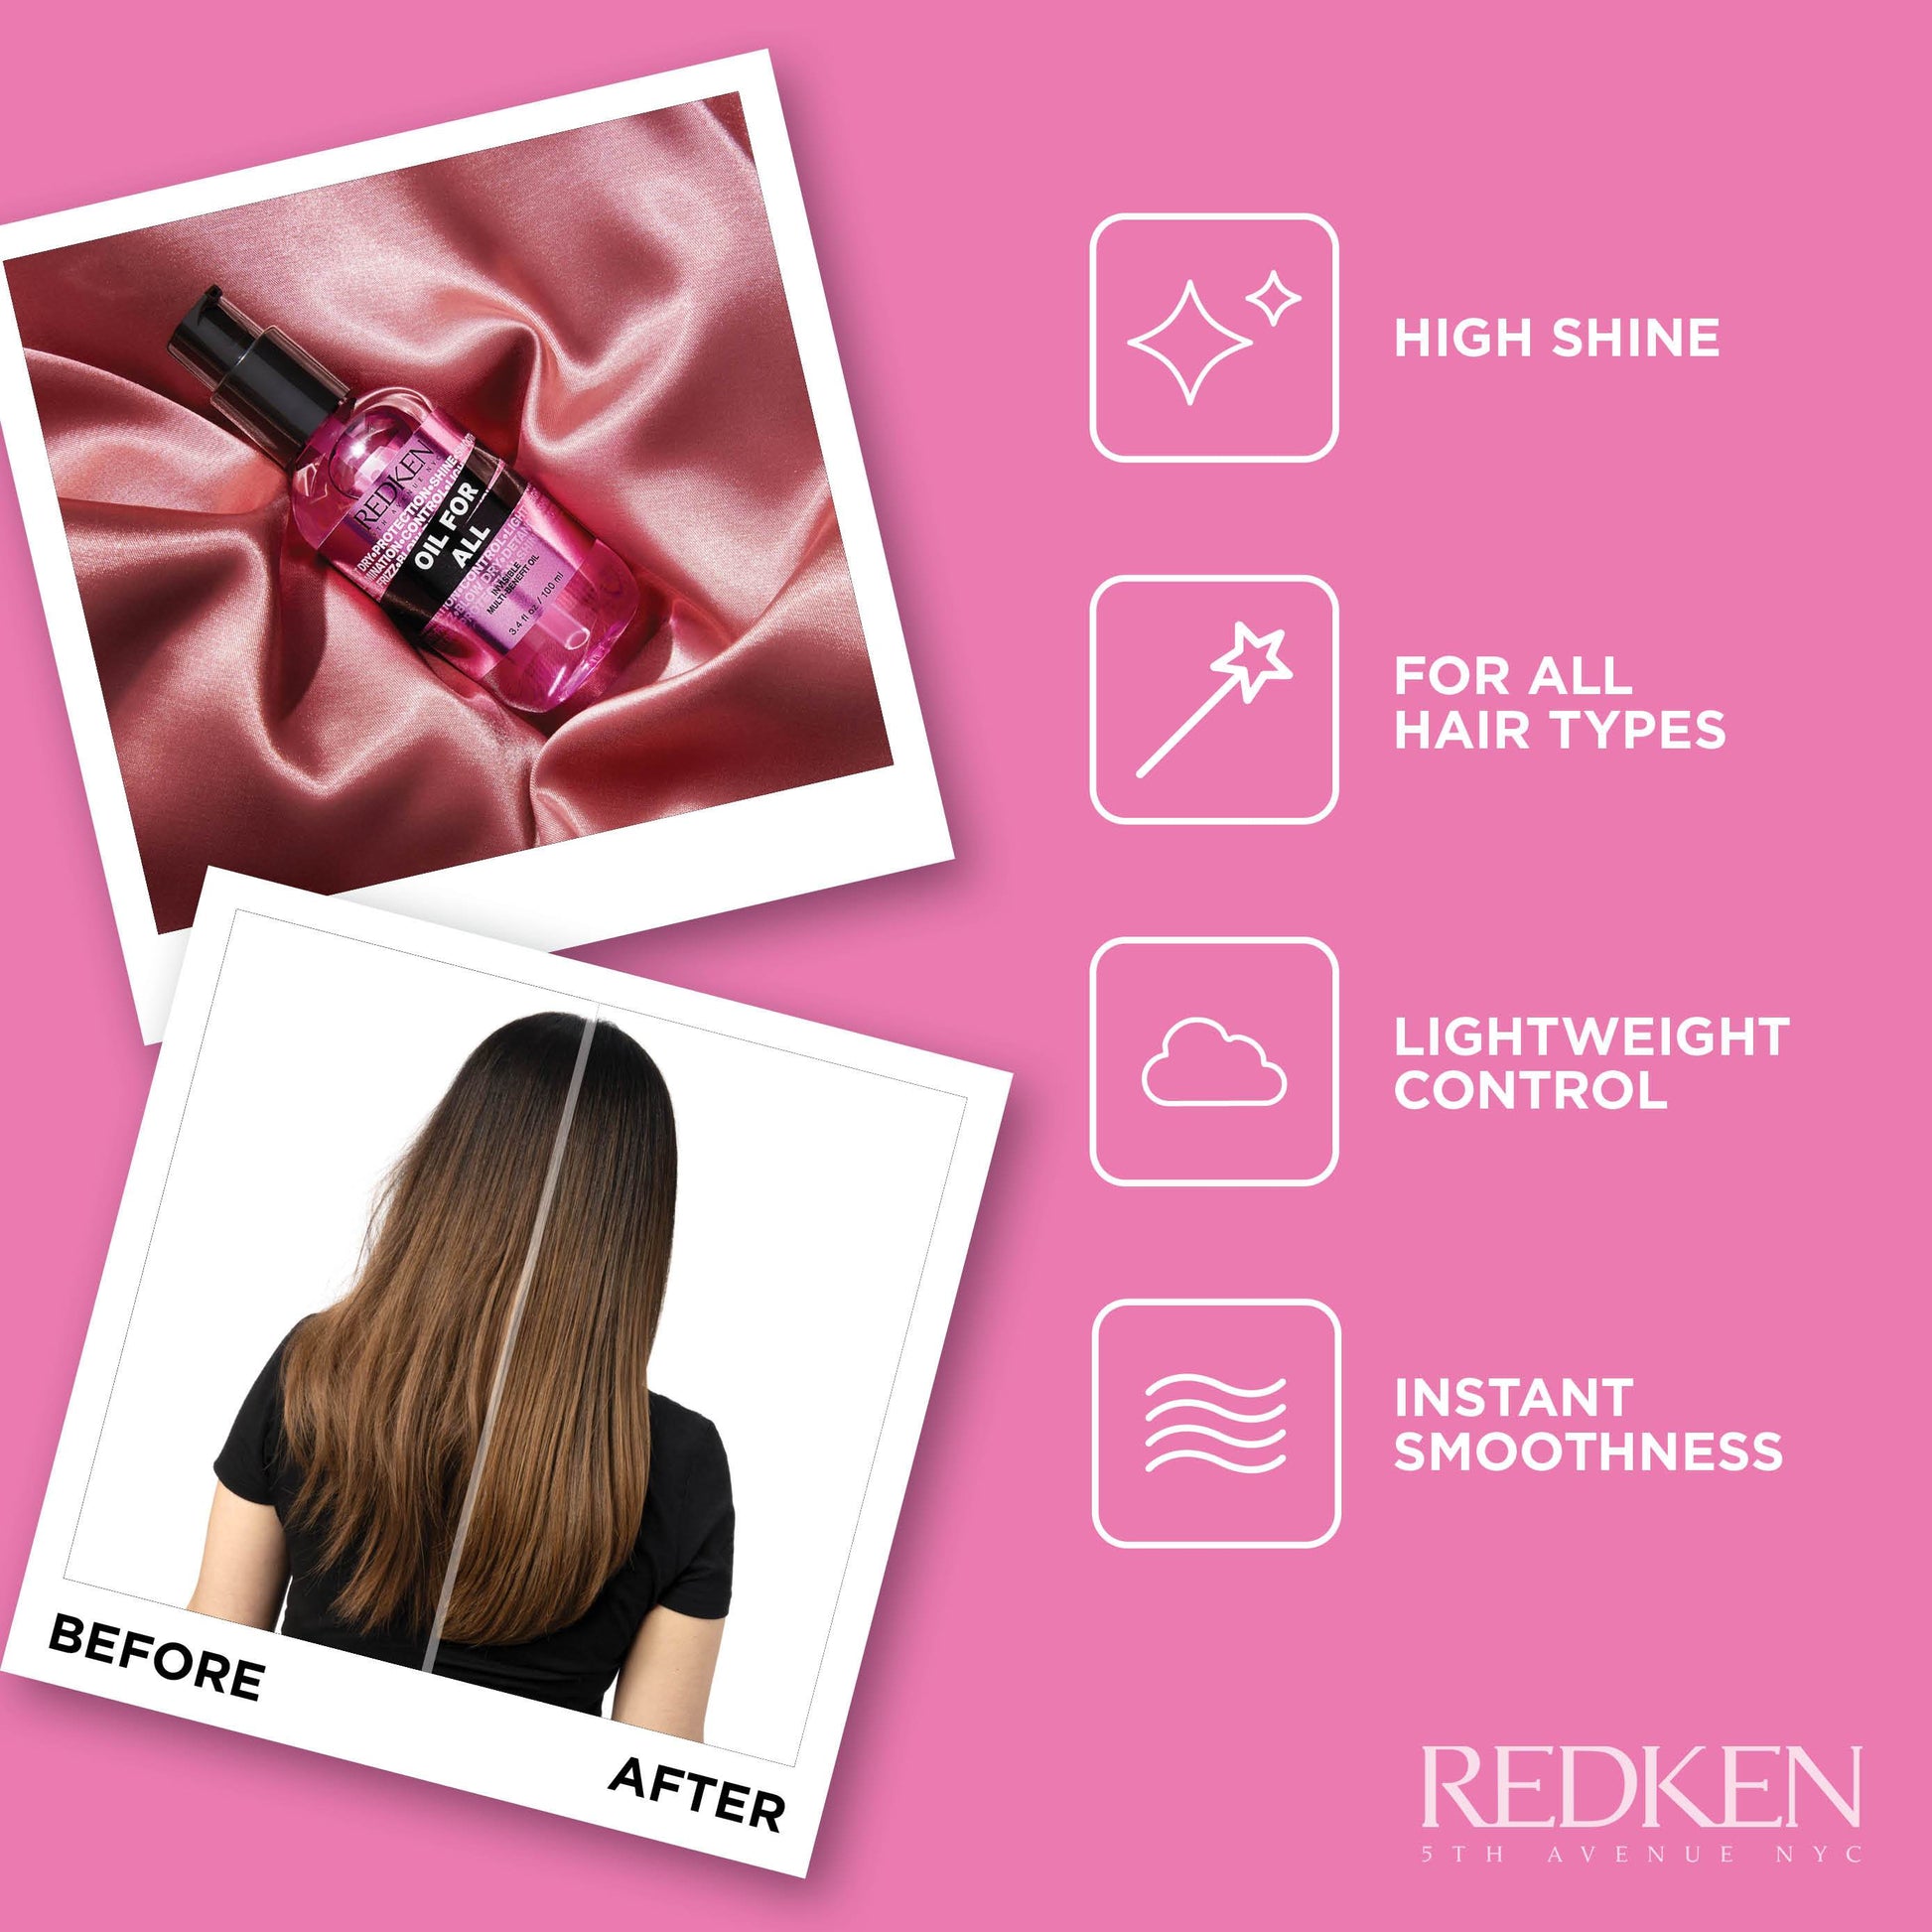 Oil For All Redken - Shop Beauty By Elayne James